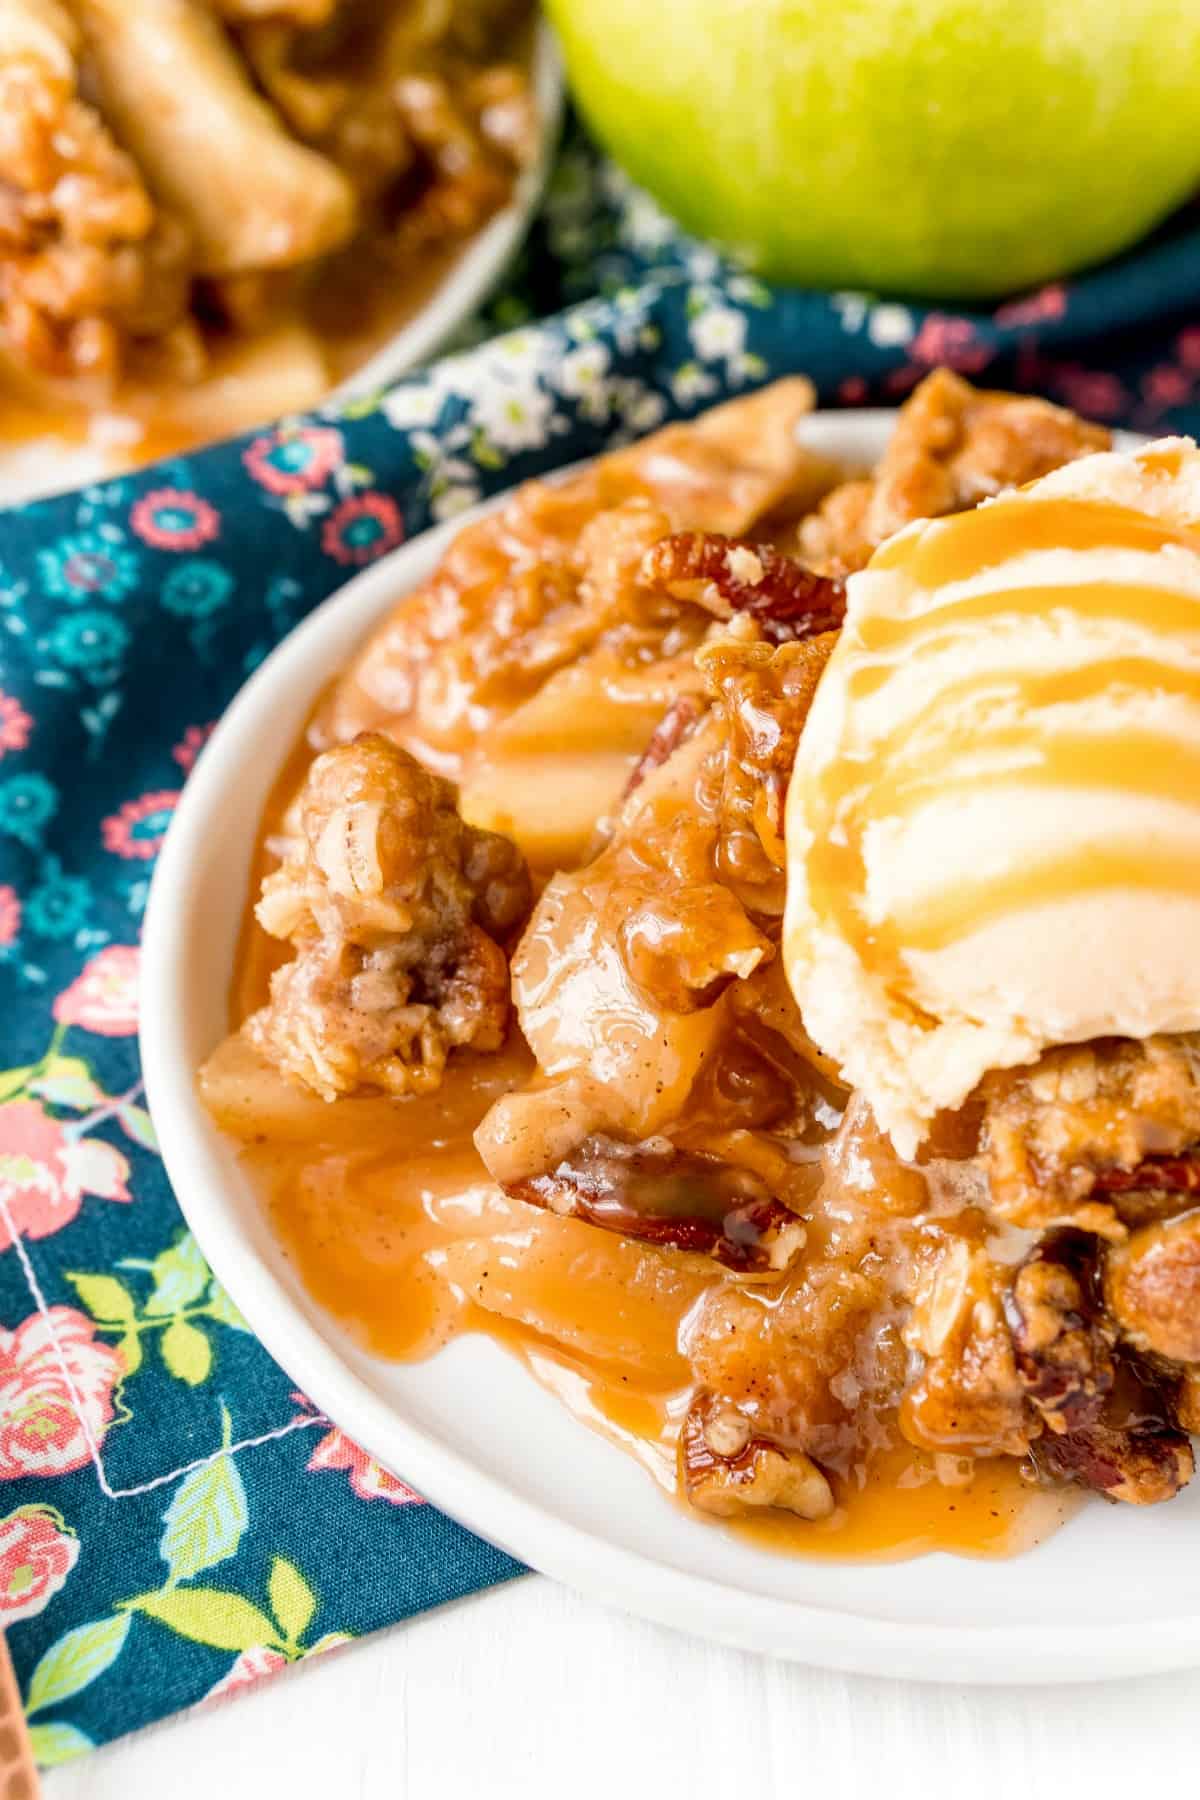 Apple crisp on plate with ice cream and caramel.